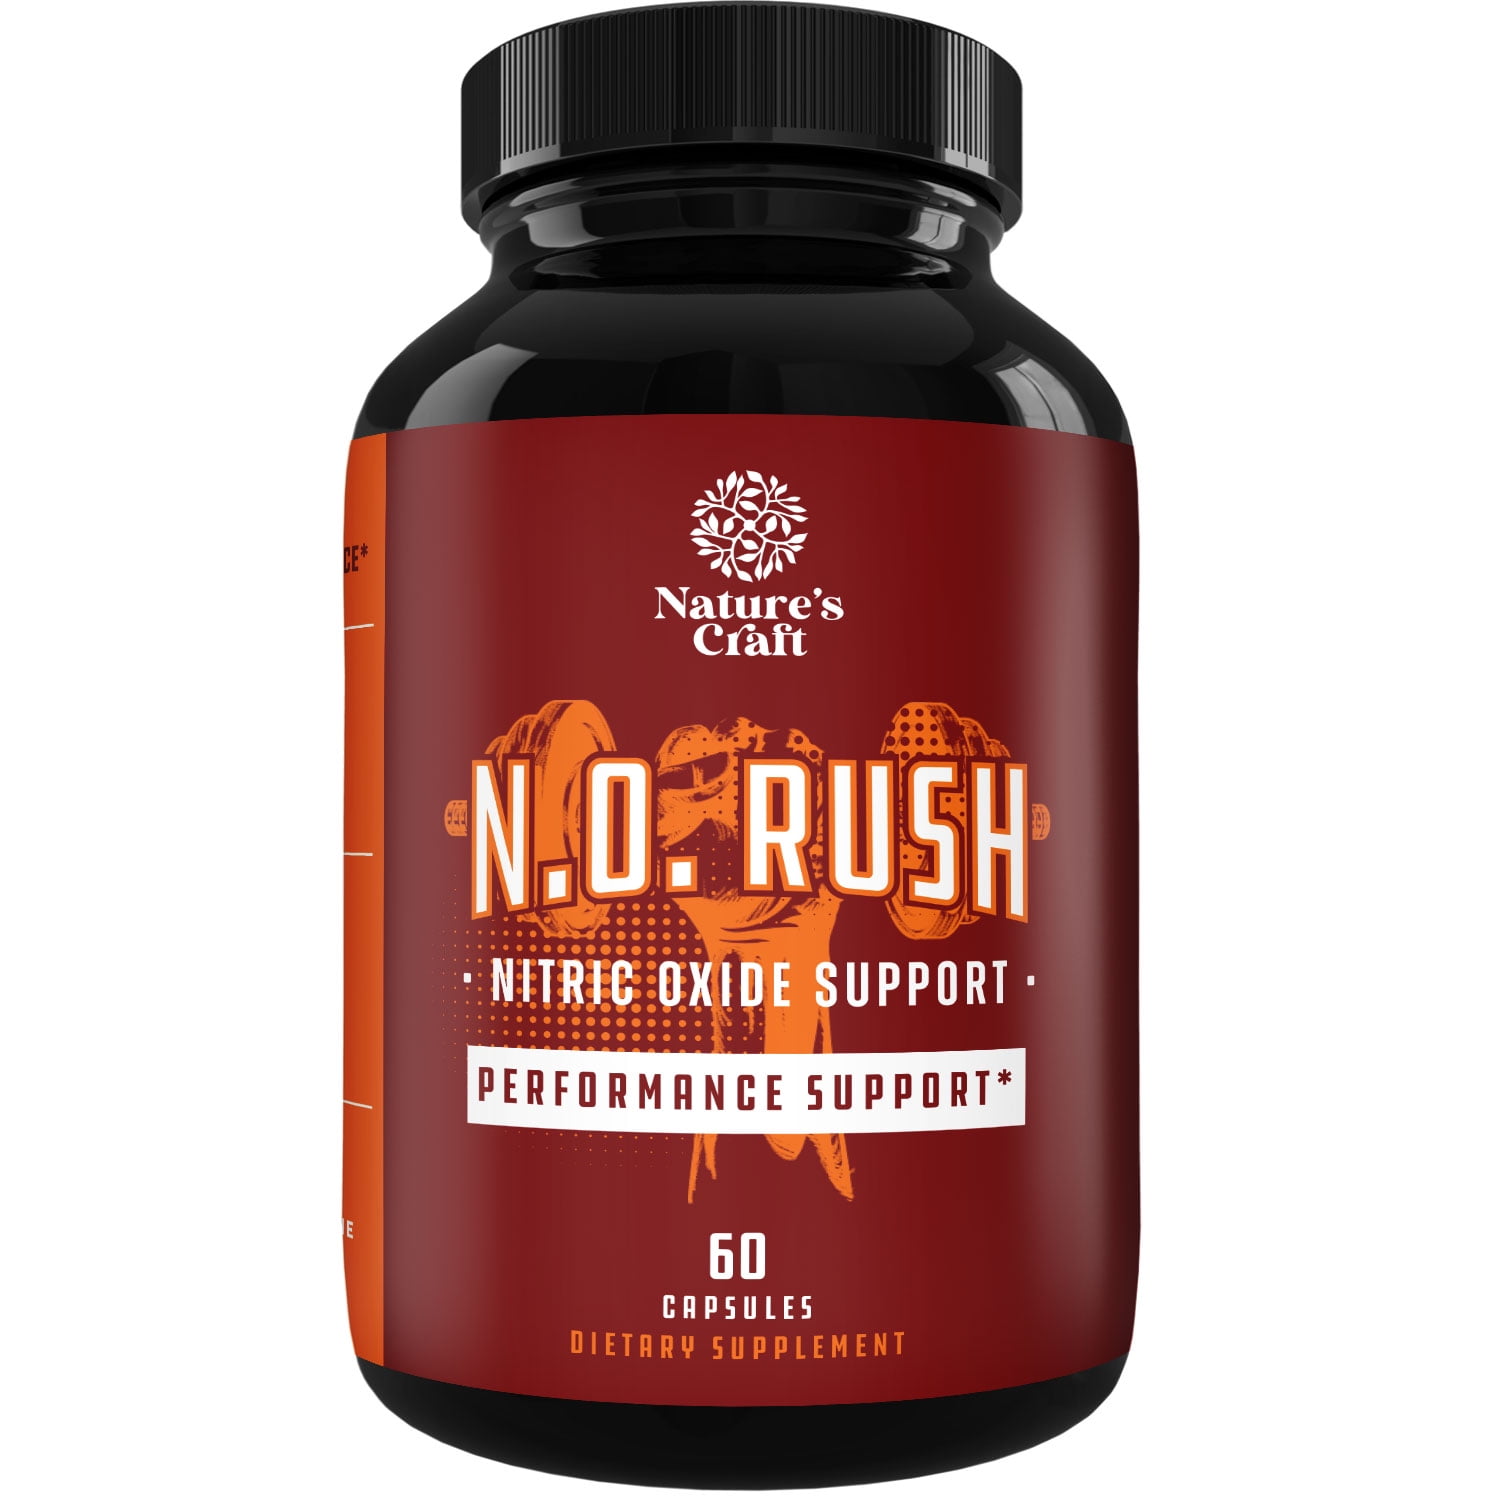 Nitric Oxide Supplement Support Pills - Natures Craft Natural Workout Supplement with Niacin Calcium